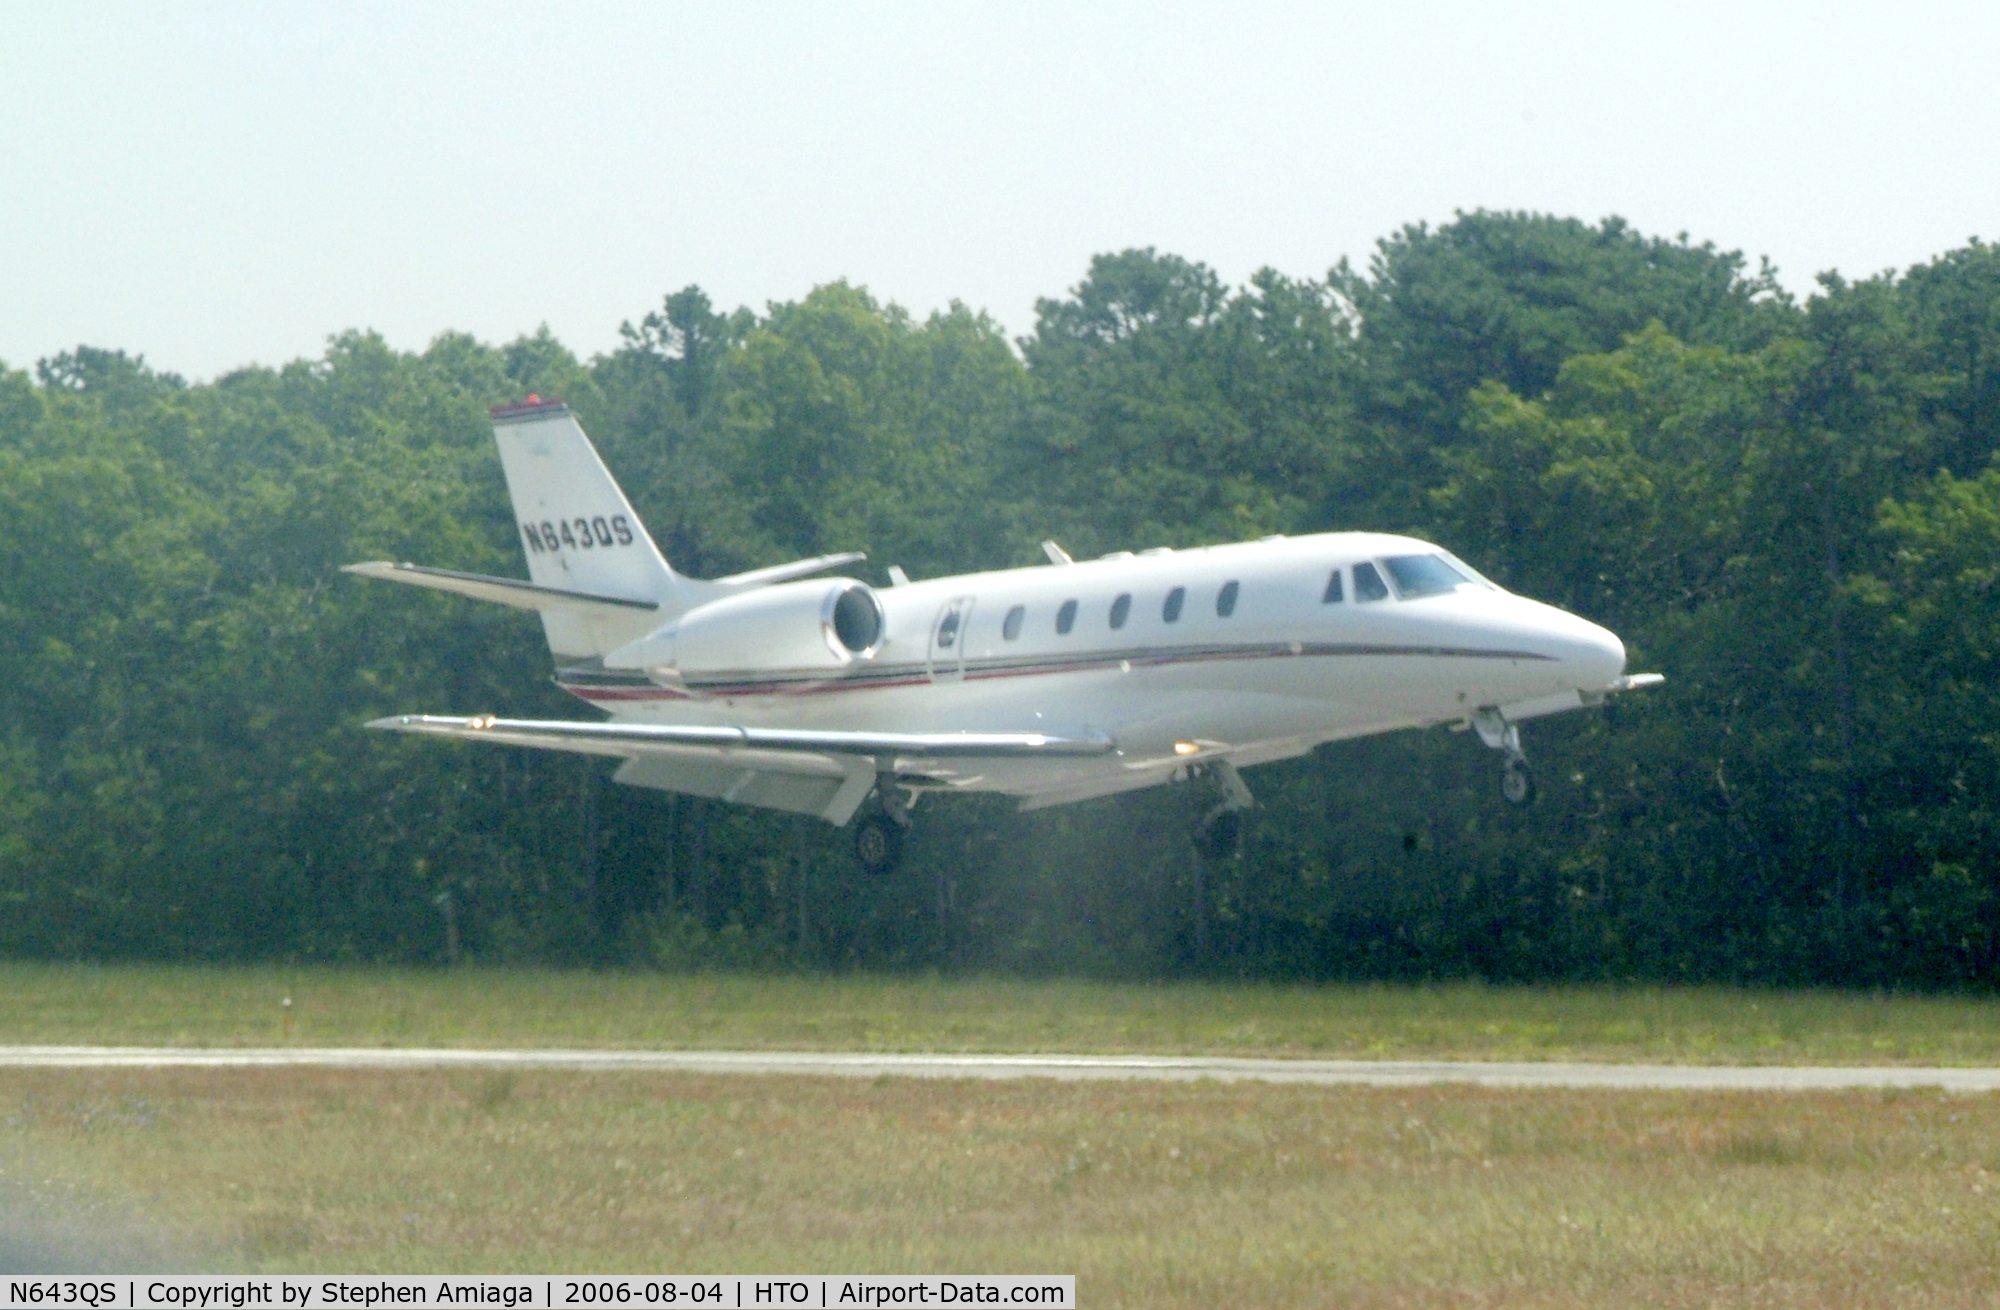 N643QS, 2005 Cessna 560XL C/N 560-5588, Just about to land RWY 28.